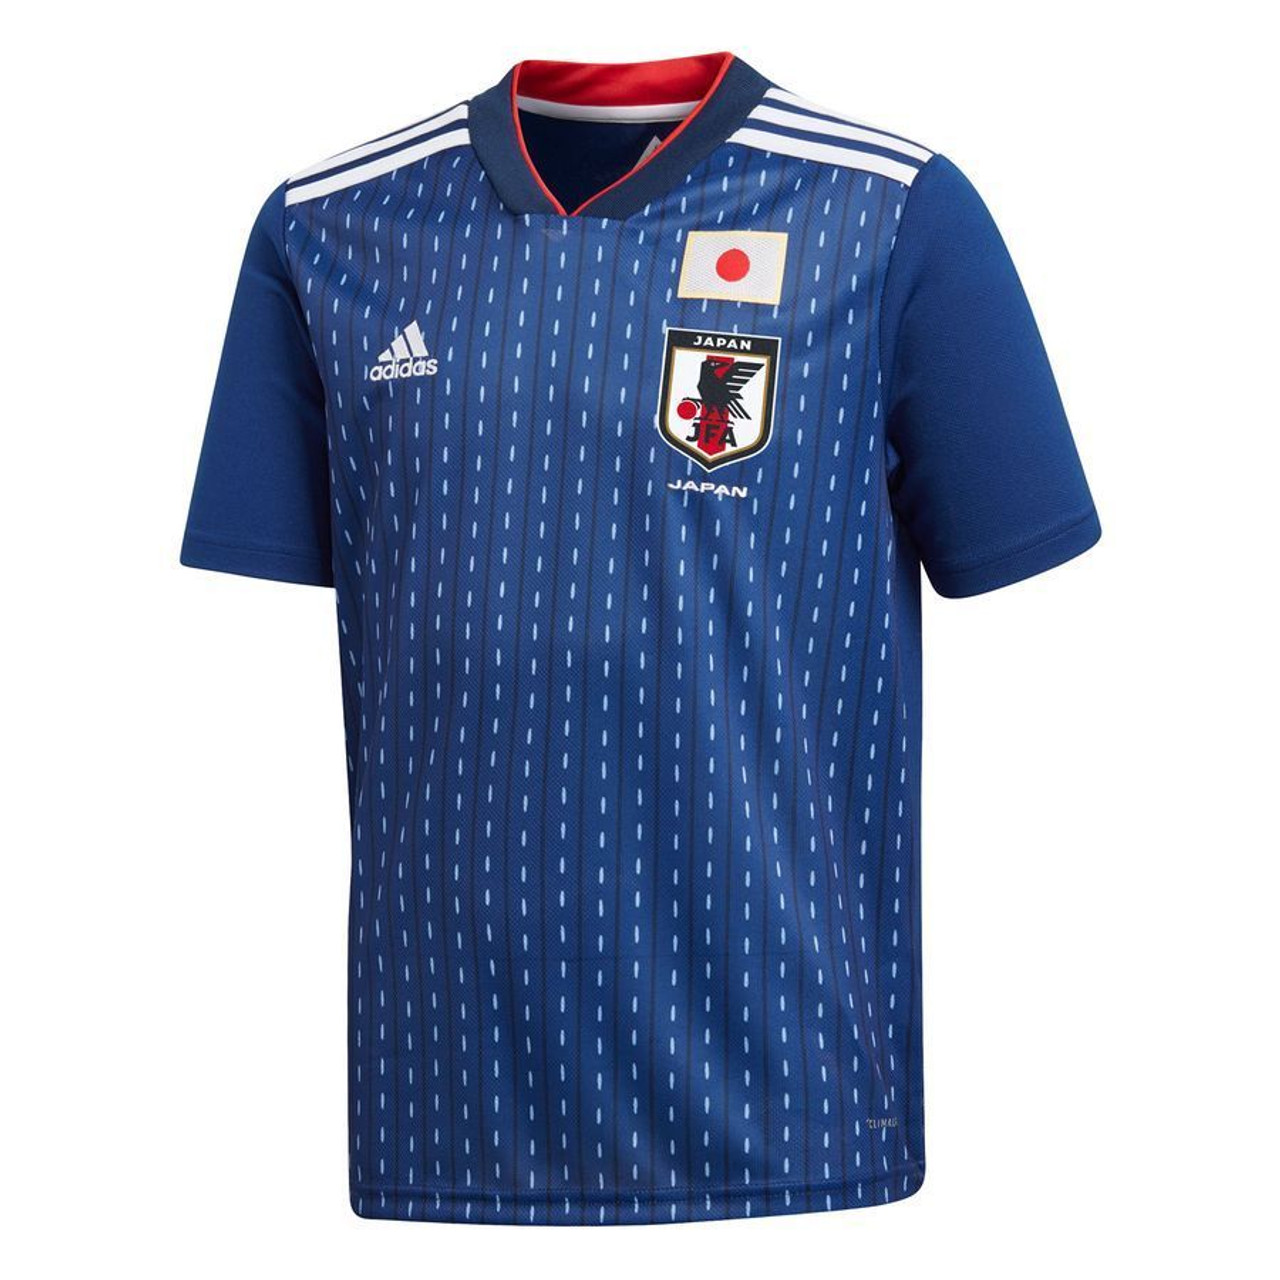 JAPAN 2018 WORLD CUP HOME JERSEY - Plus